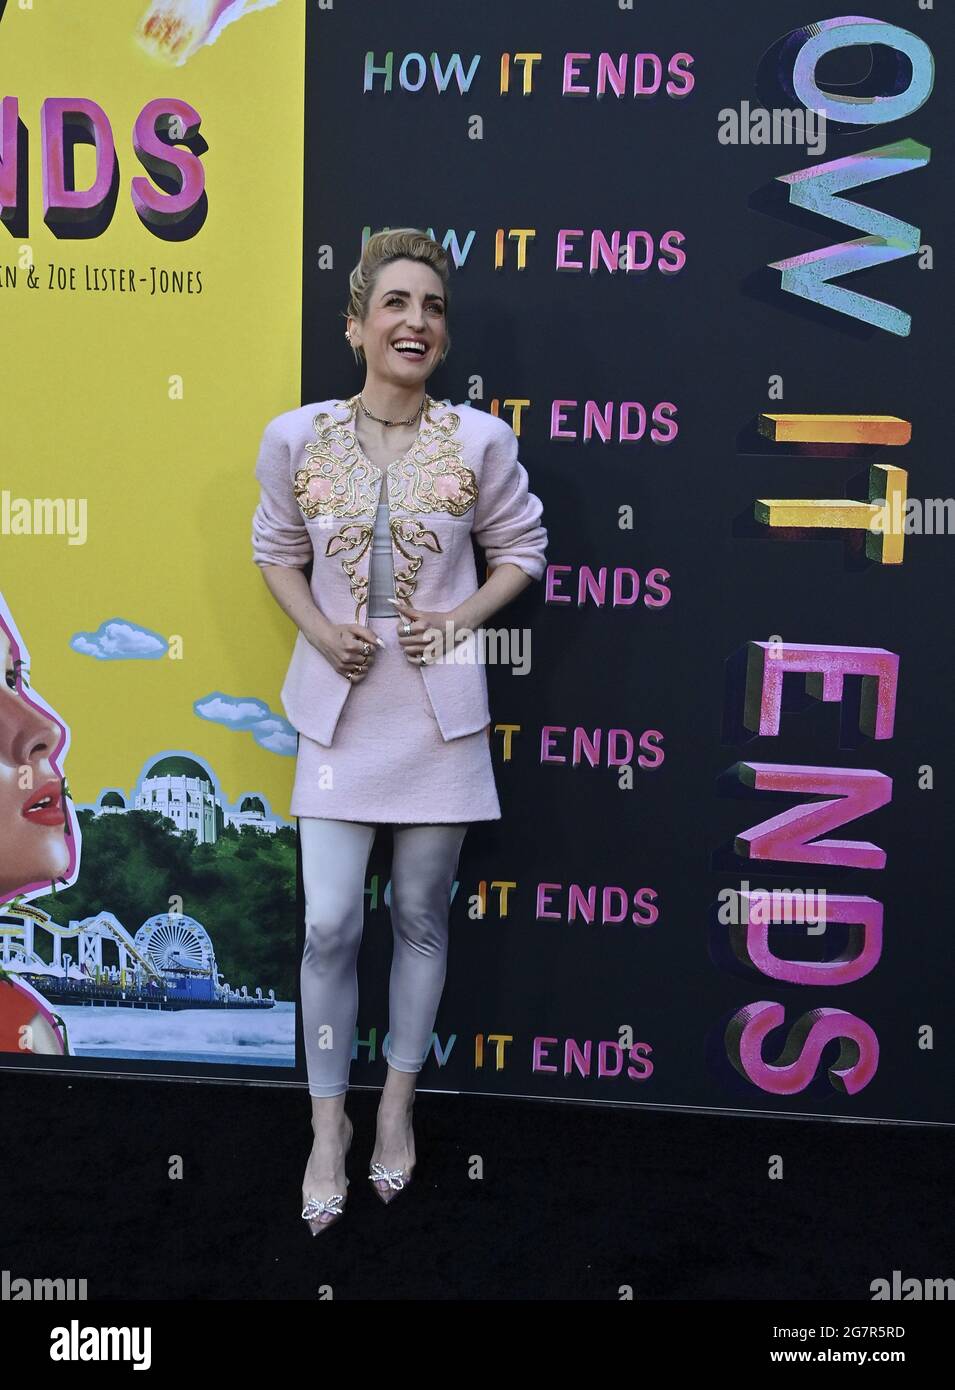 Los Angeles, United States. 16th July, 2021. Co-director, writer and cast member Zoe Lister-Jones attends the premiere of the motion picture comedy 'How It Ends' at NeueHouse in Los Angeles on Thursday, July 15, 2021. Storyline: In this feel-good apocalyptic comedy, Liza (Zoe Lister-Jones) embarks on a hilarious journey through LA in hopes of making it to her last party before it all ends, running into an eclectic cast of characters along the way. Photo by Jim Ruymen/UPI Credit: UPI/Alamy Live News Stock Photo